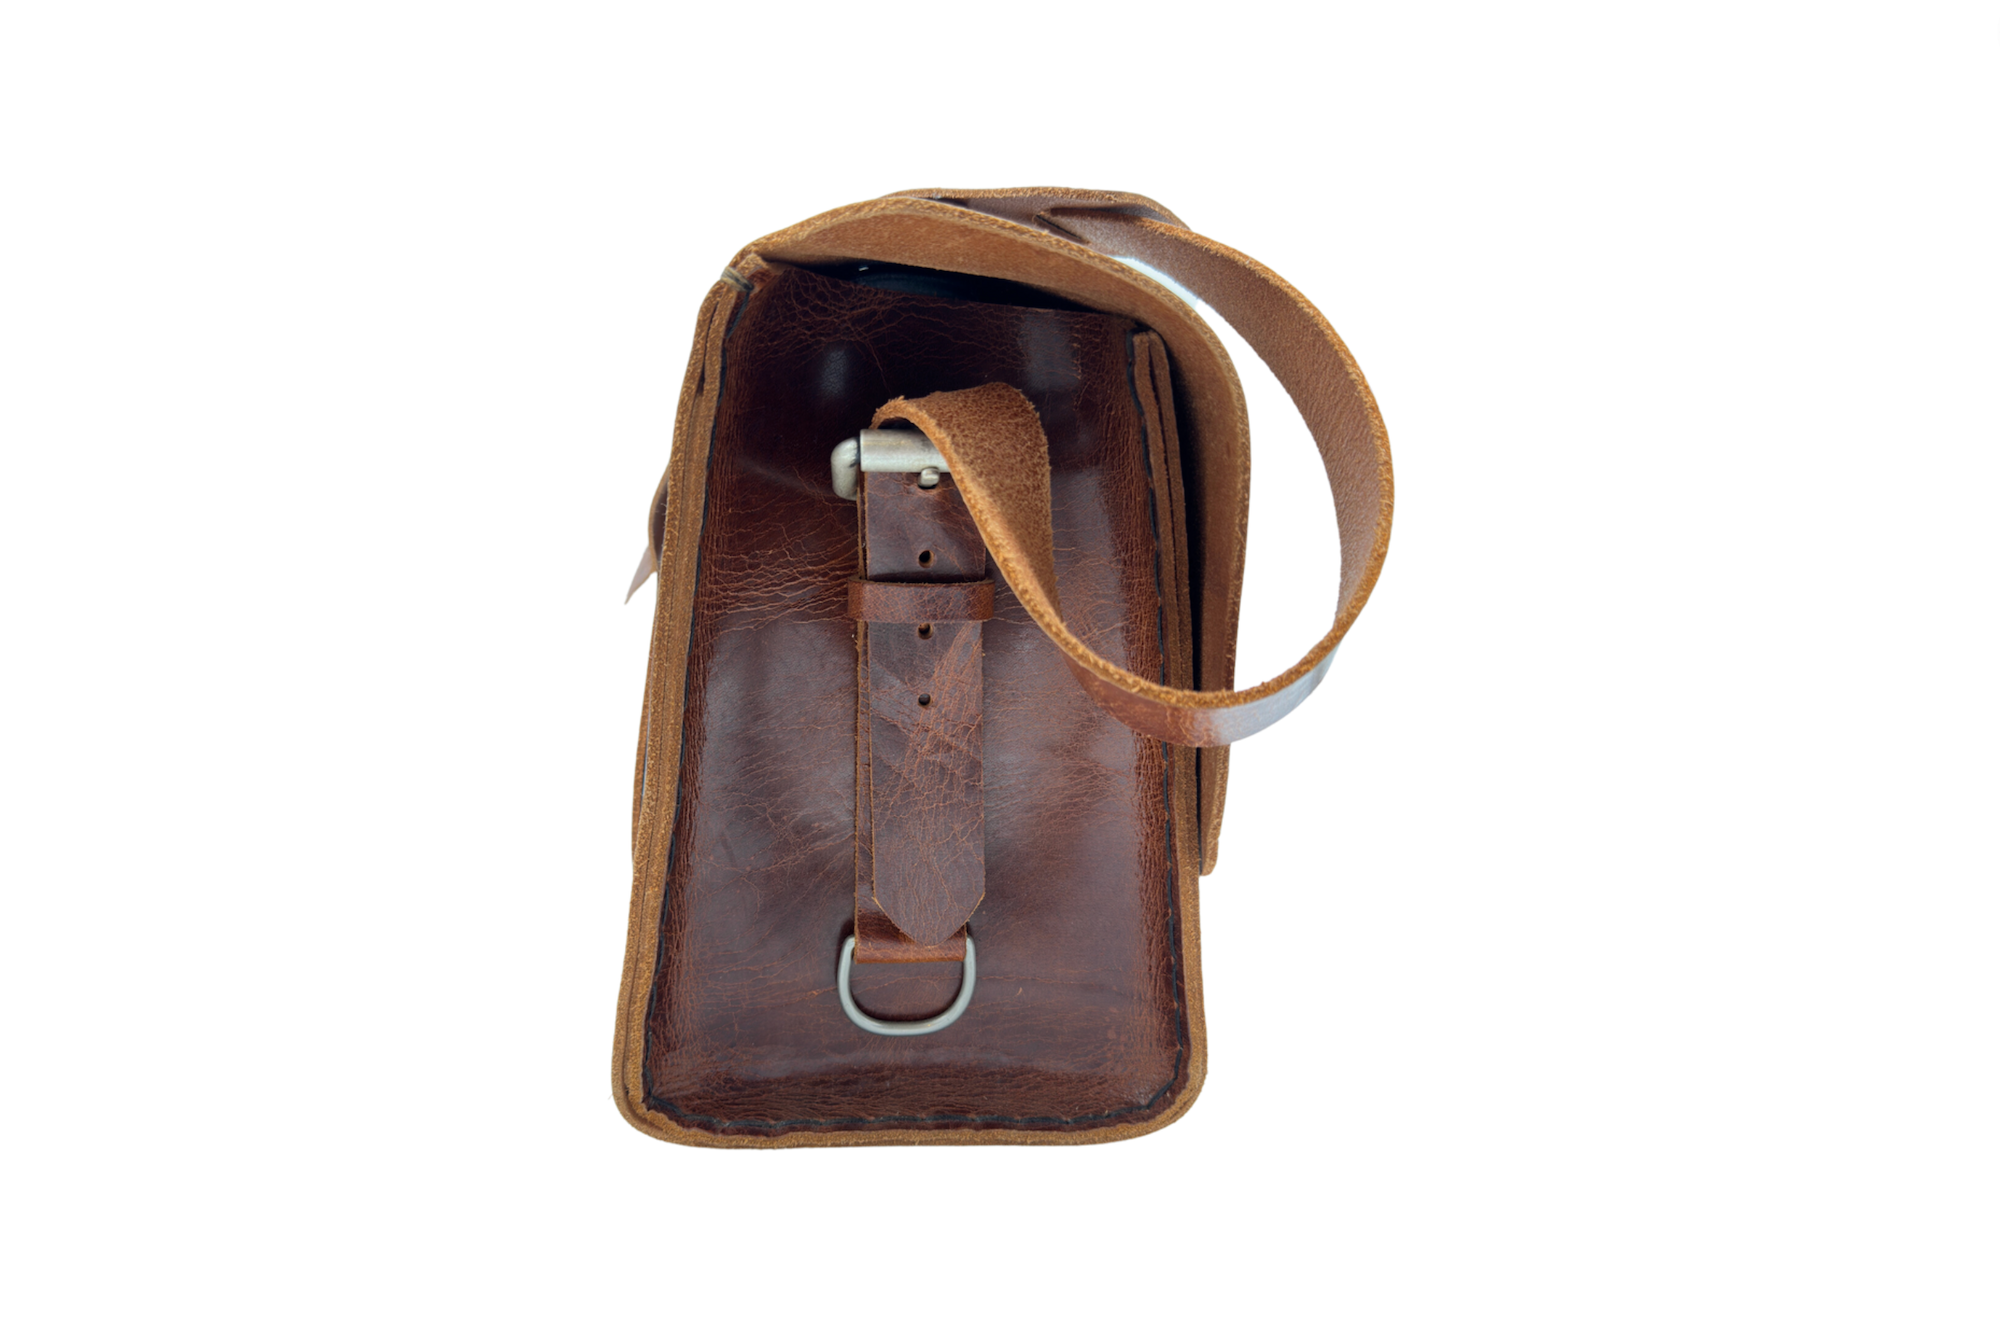 Seasoned No. 4311 - Large Satchel in Glazed Tan With Rear Exterior Pocket and Leather Divider